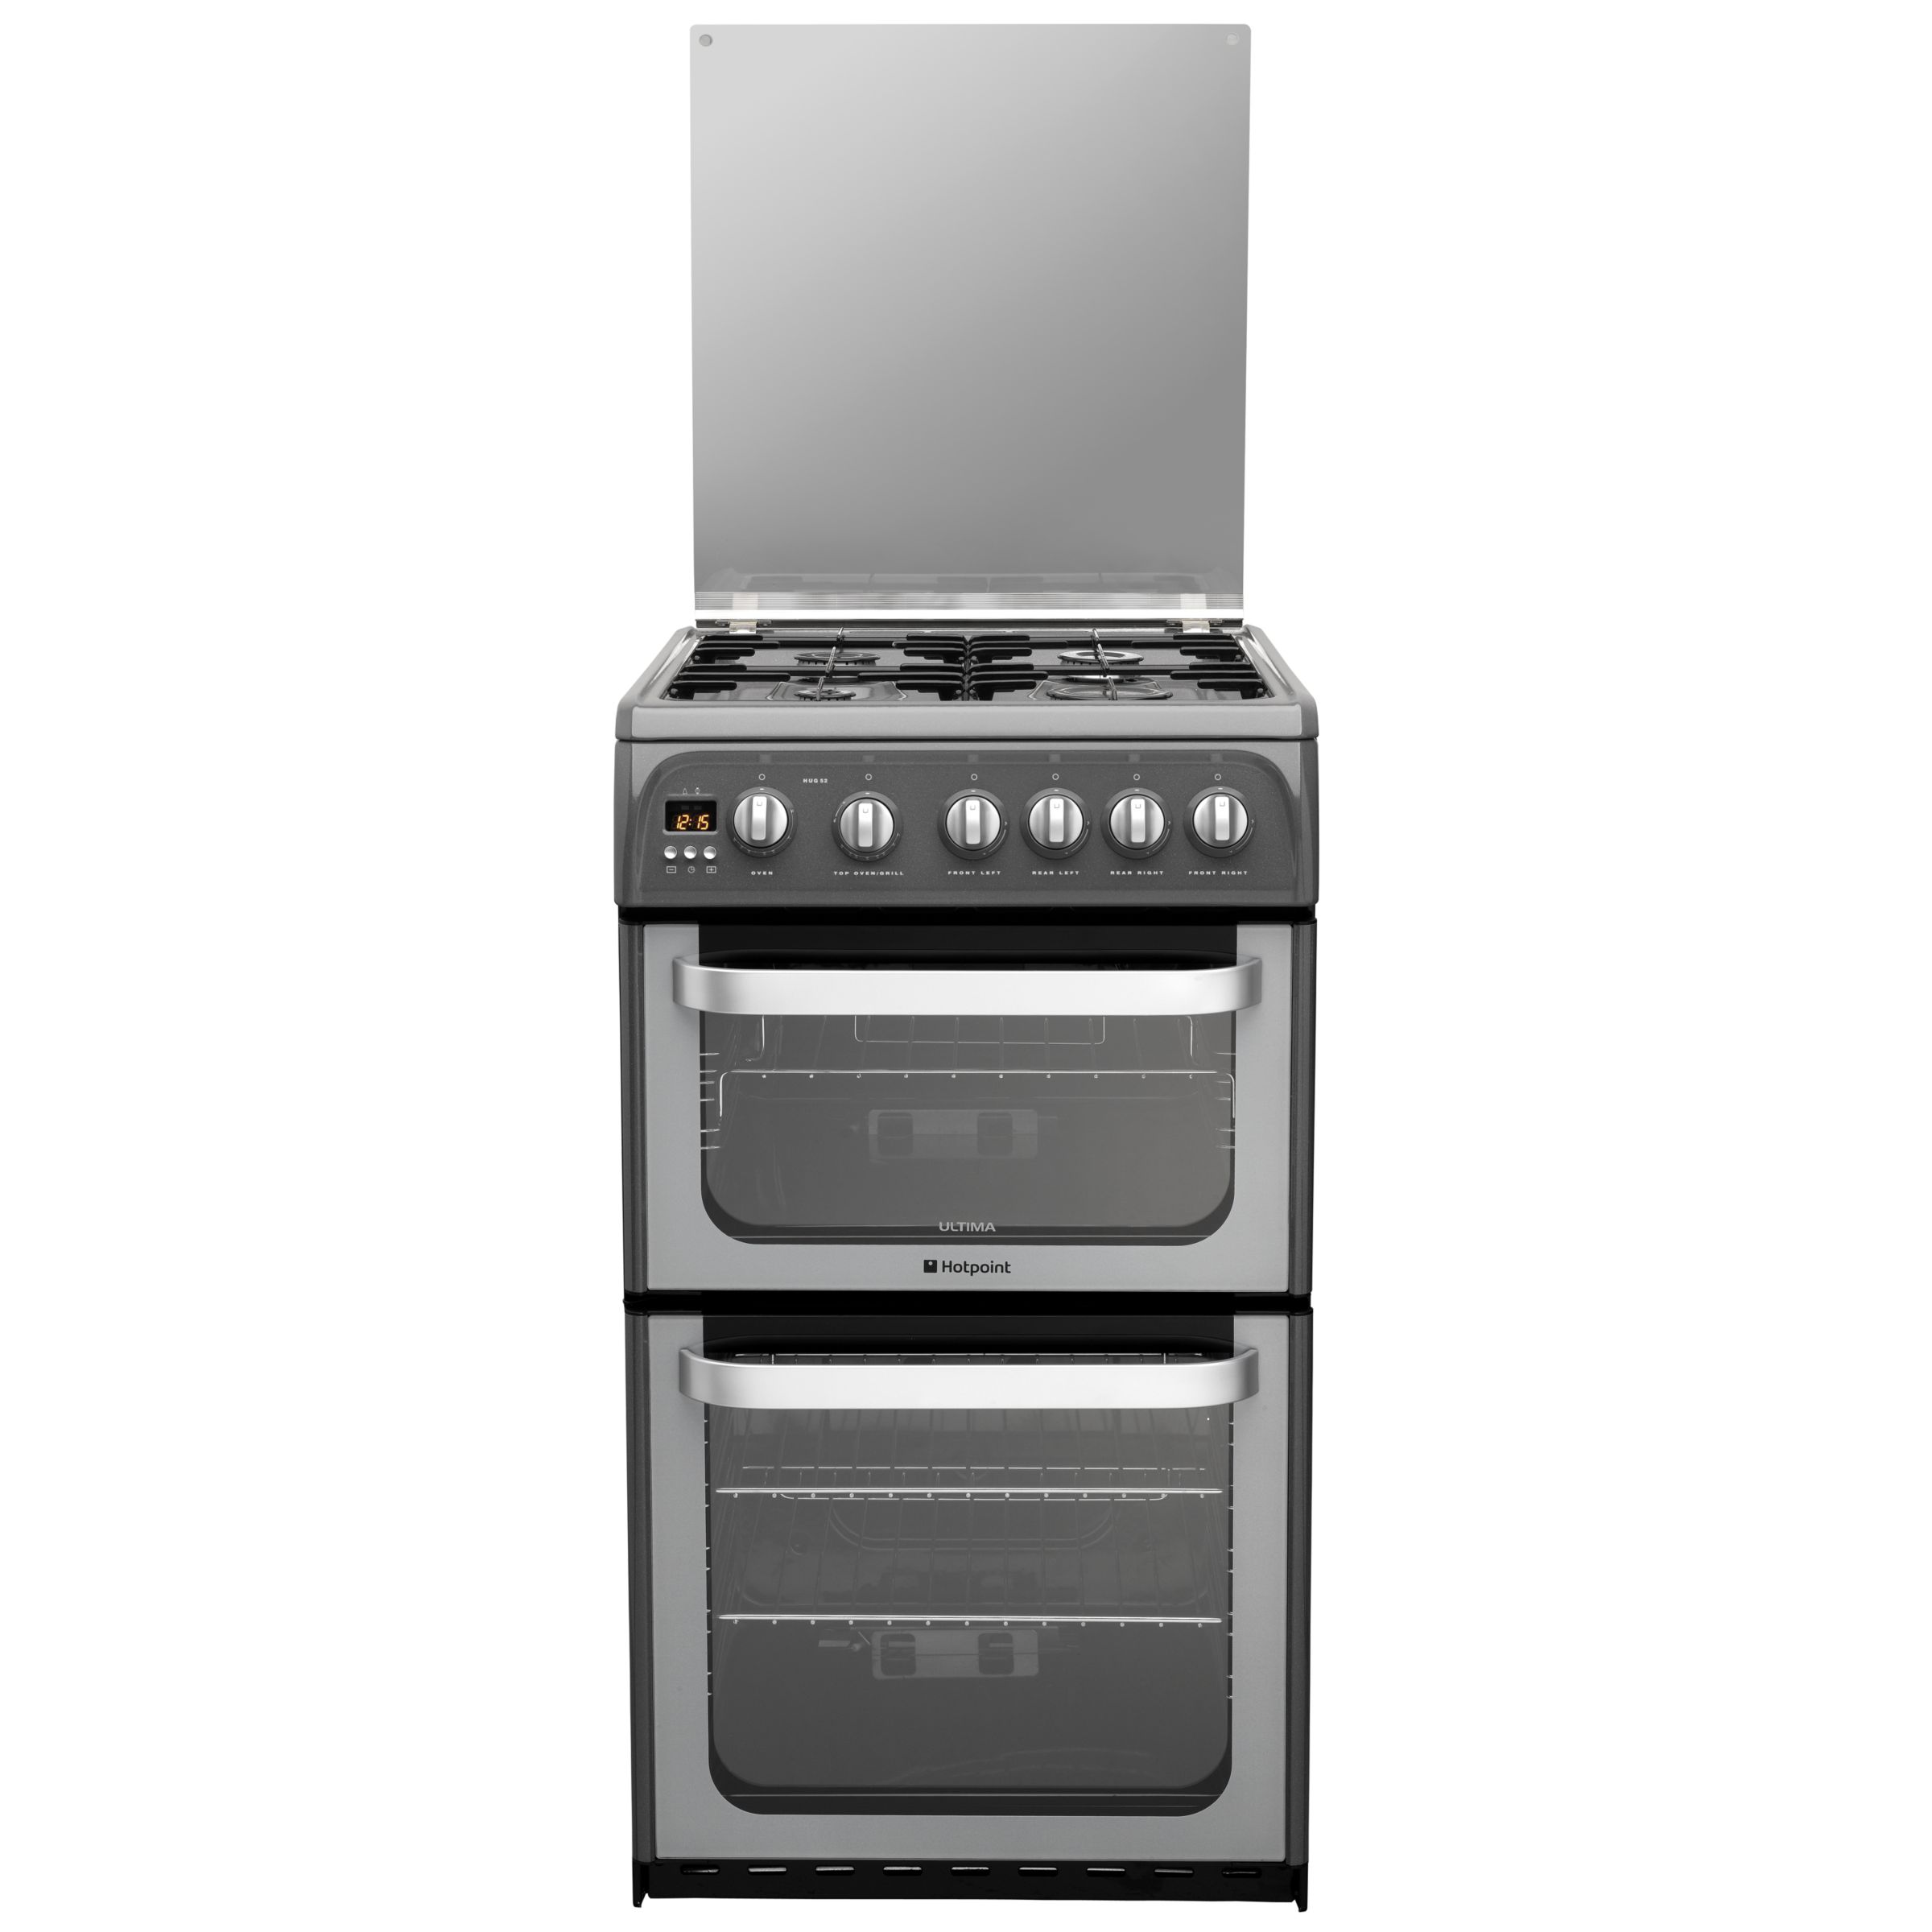 Hotpoint Ultima HUG52G Gas Cooker, Graphite at JohnLewis